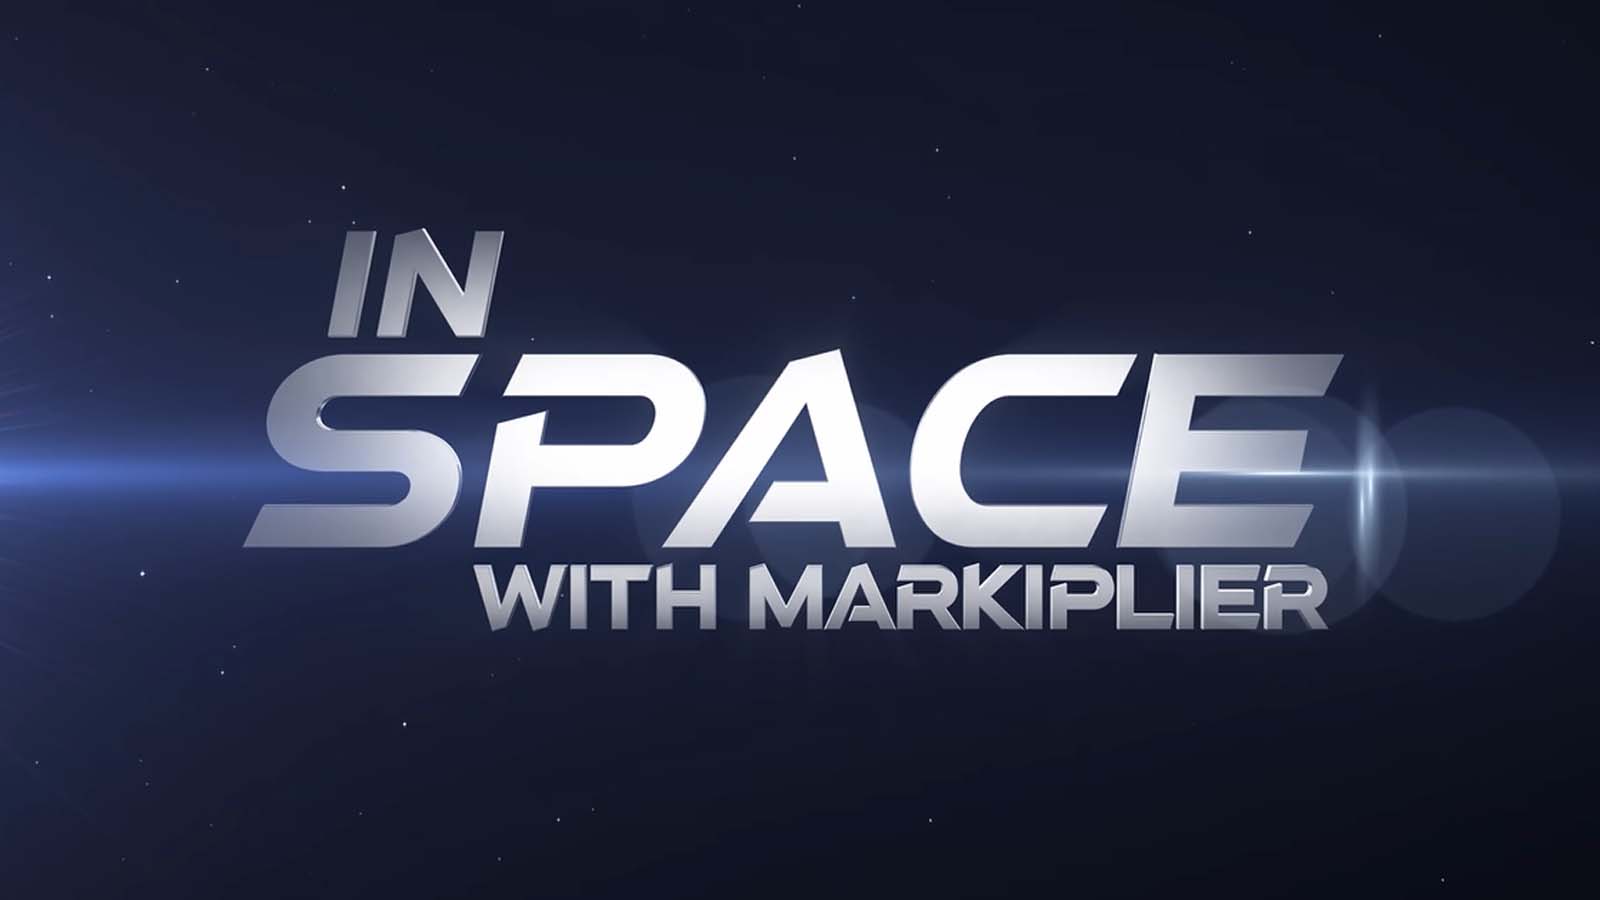 in space with markiplier